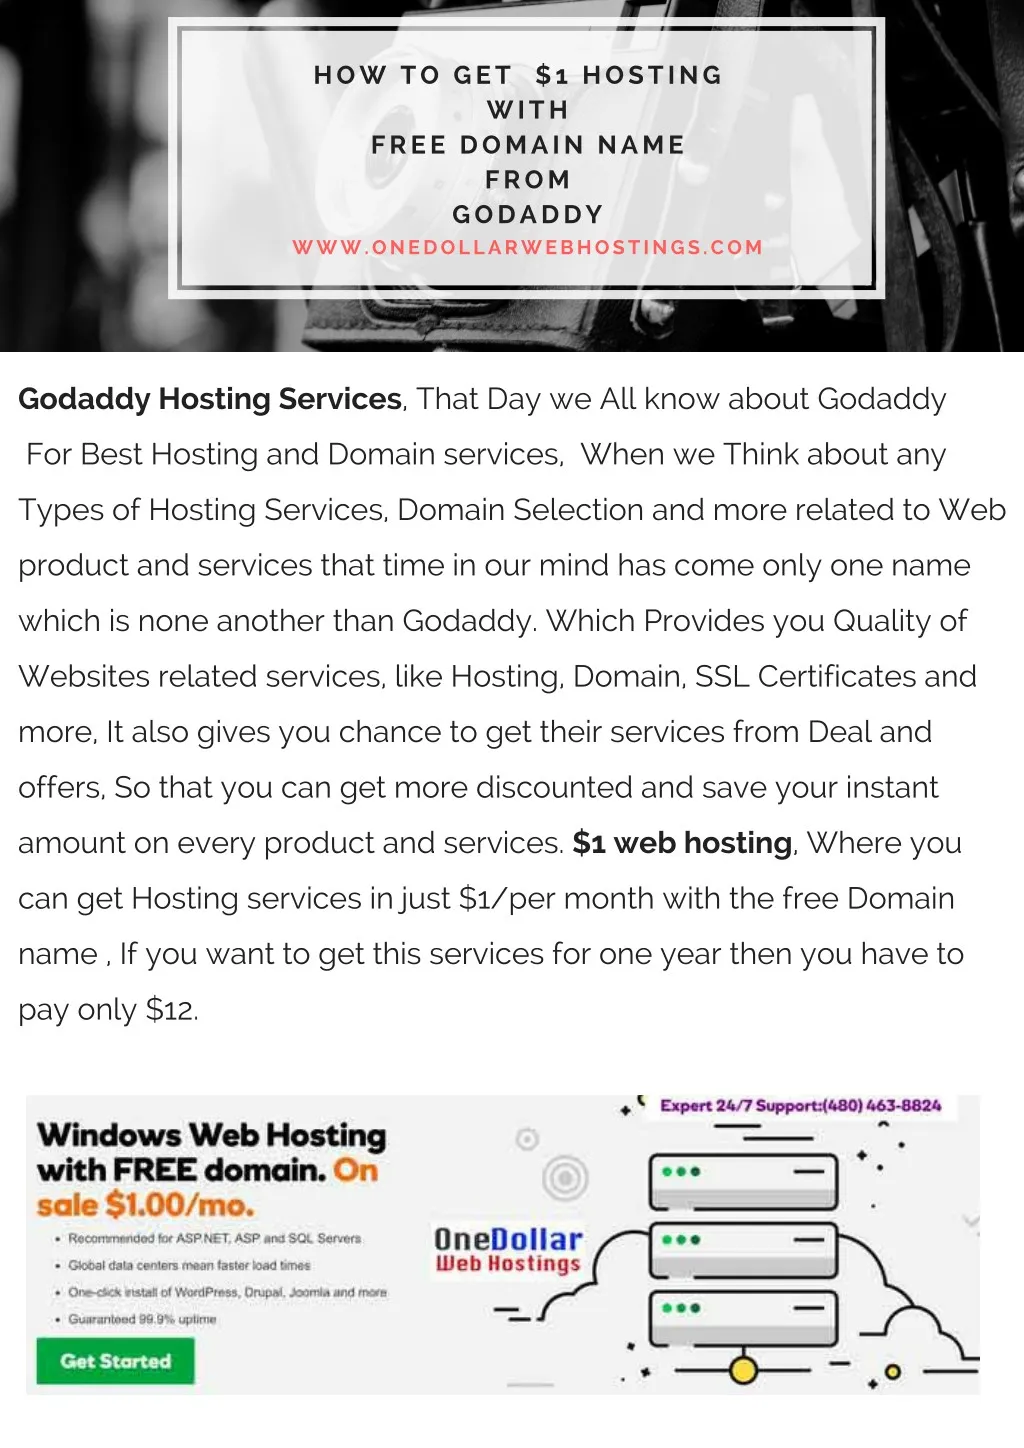 how to get 1 hosting with free domain name from